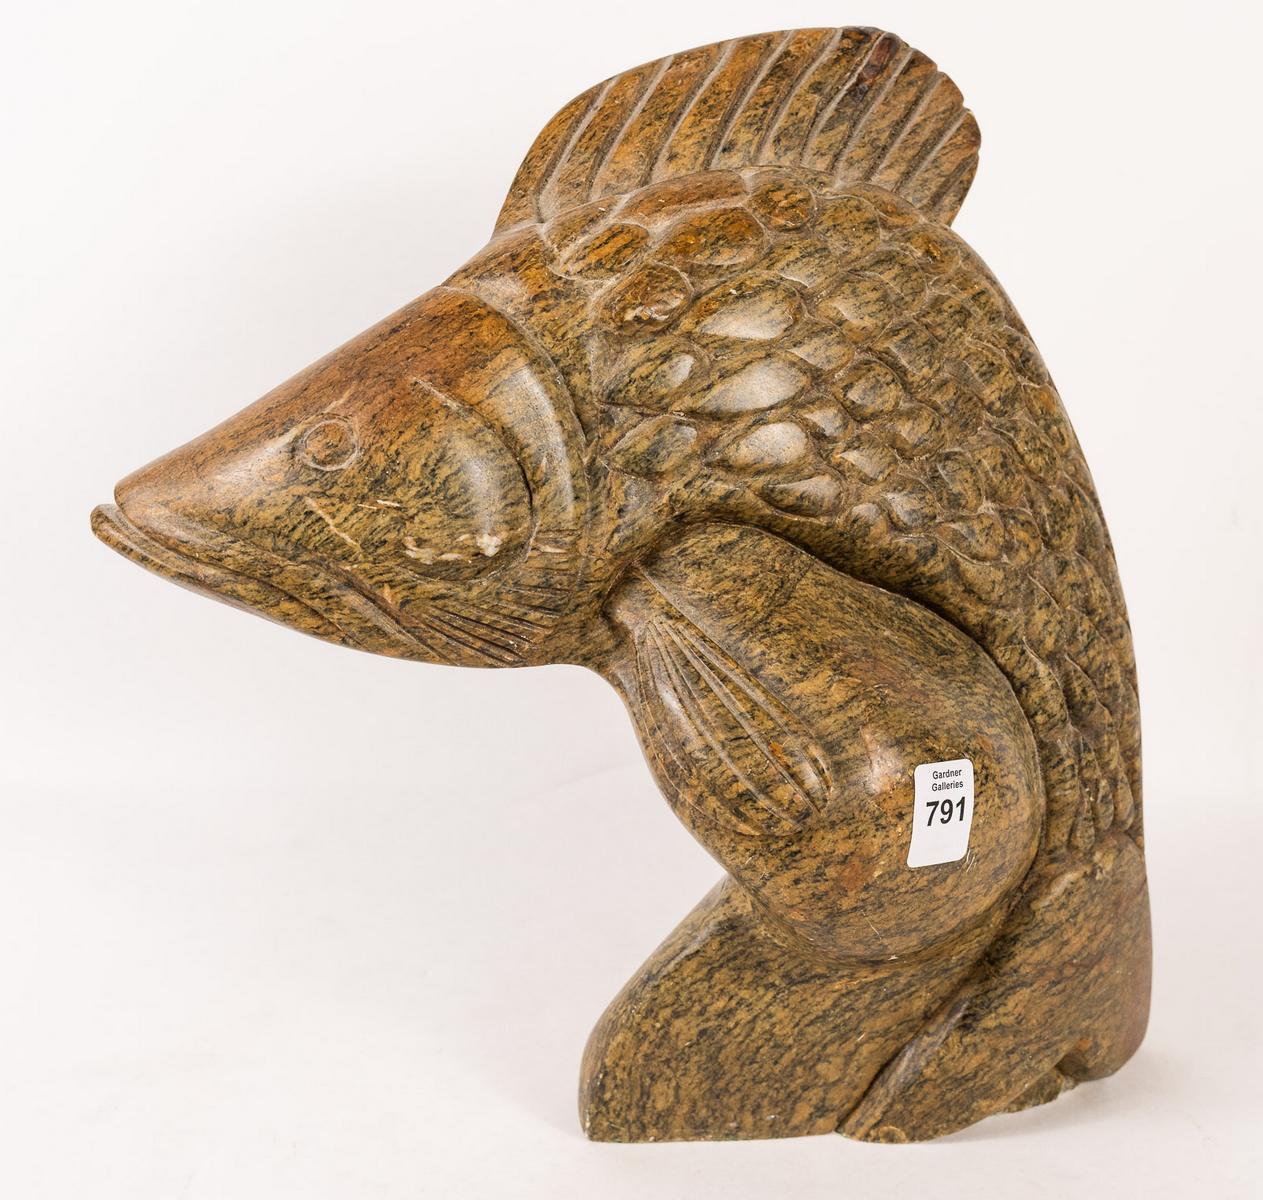 LARGE FIRST NATIONS "FISH" CARVING